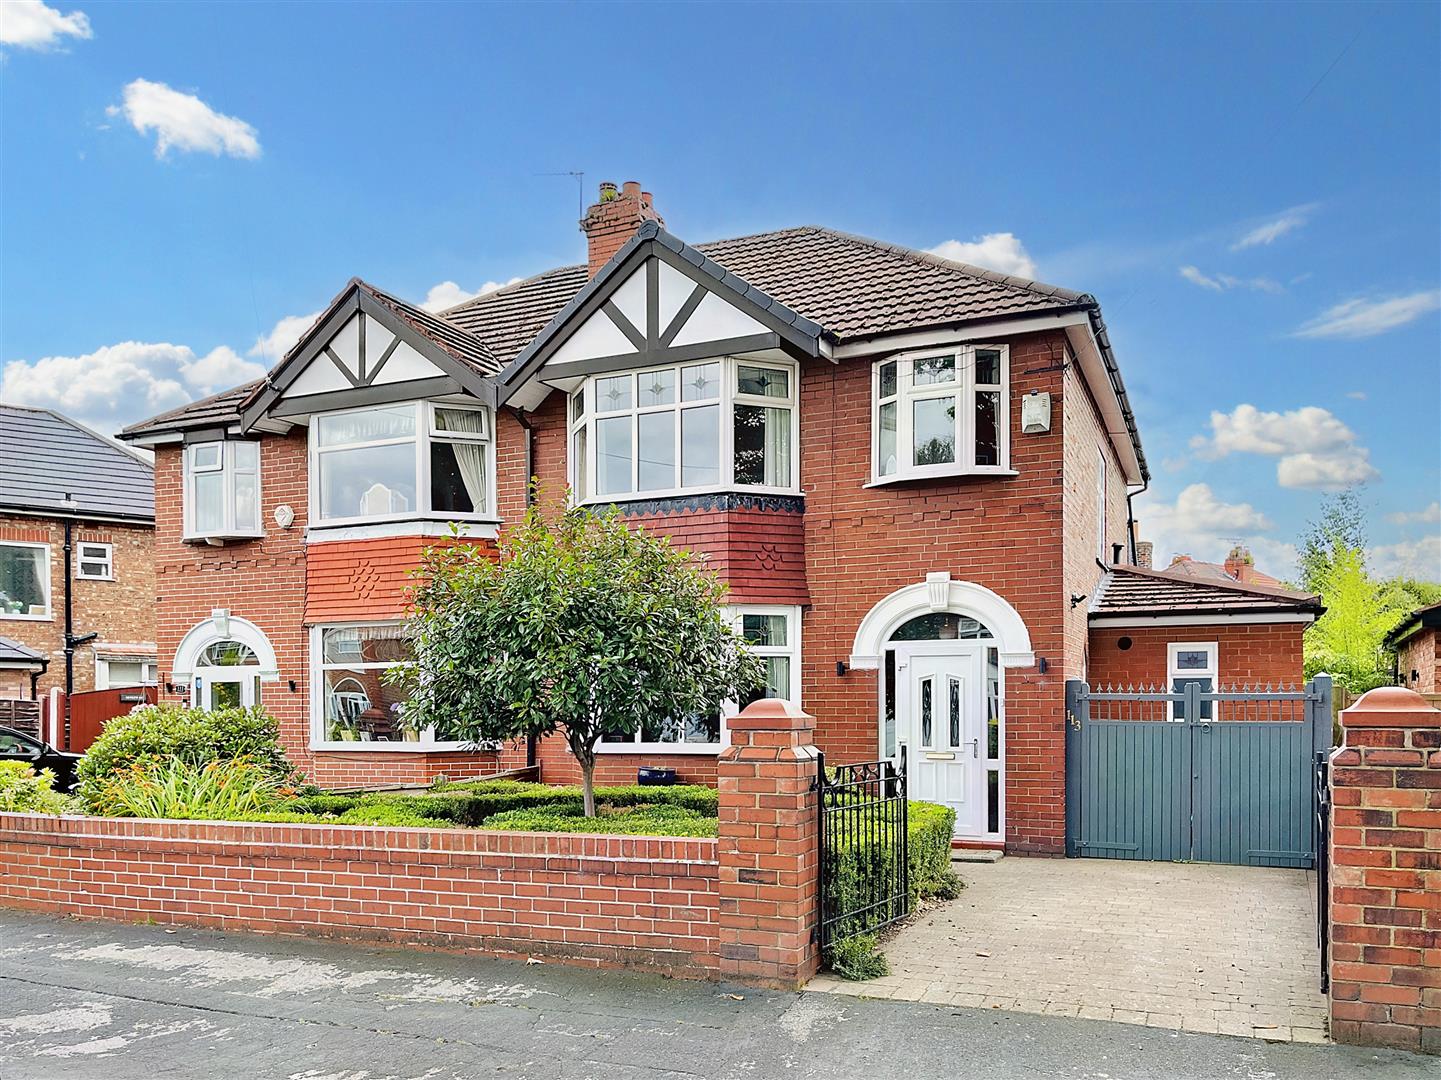 3 bed semi-detached house for sale in Walton Road, Sale - Property Image 1